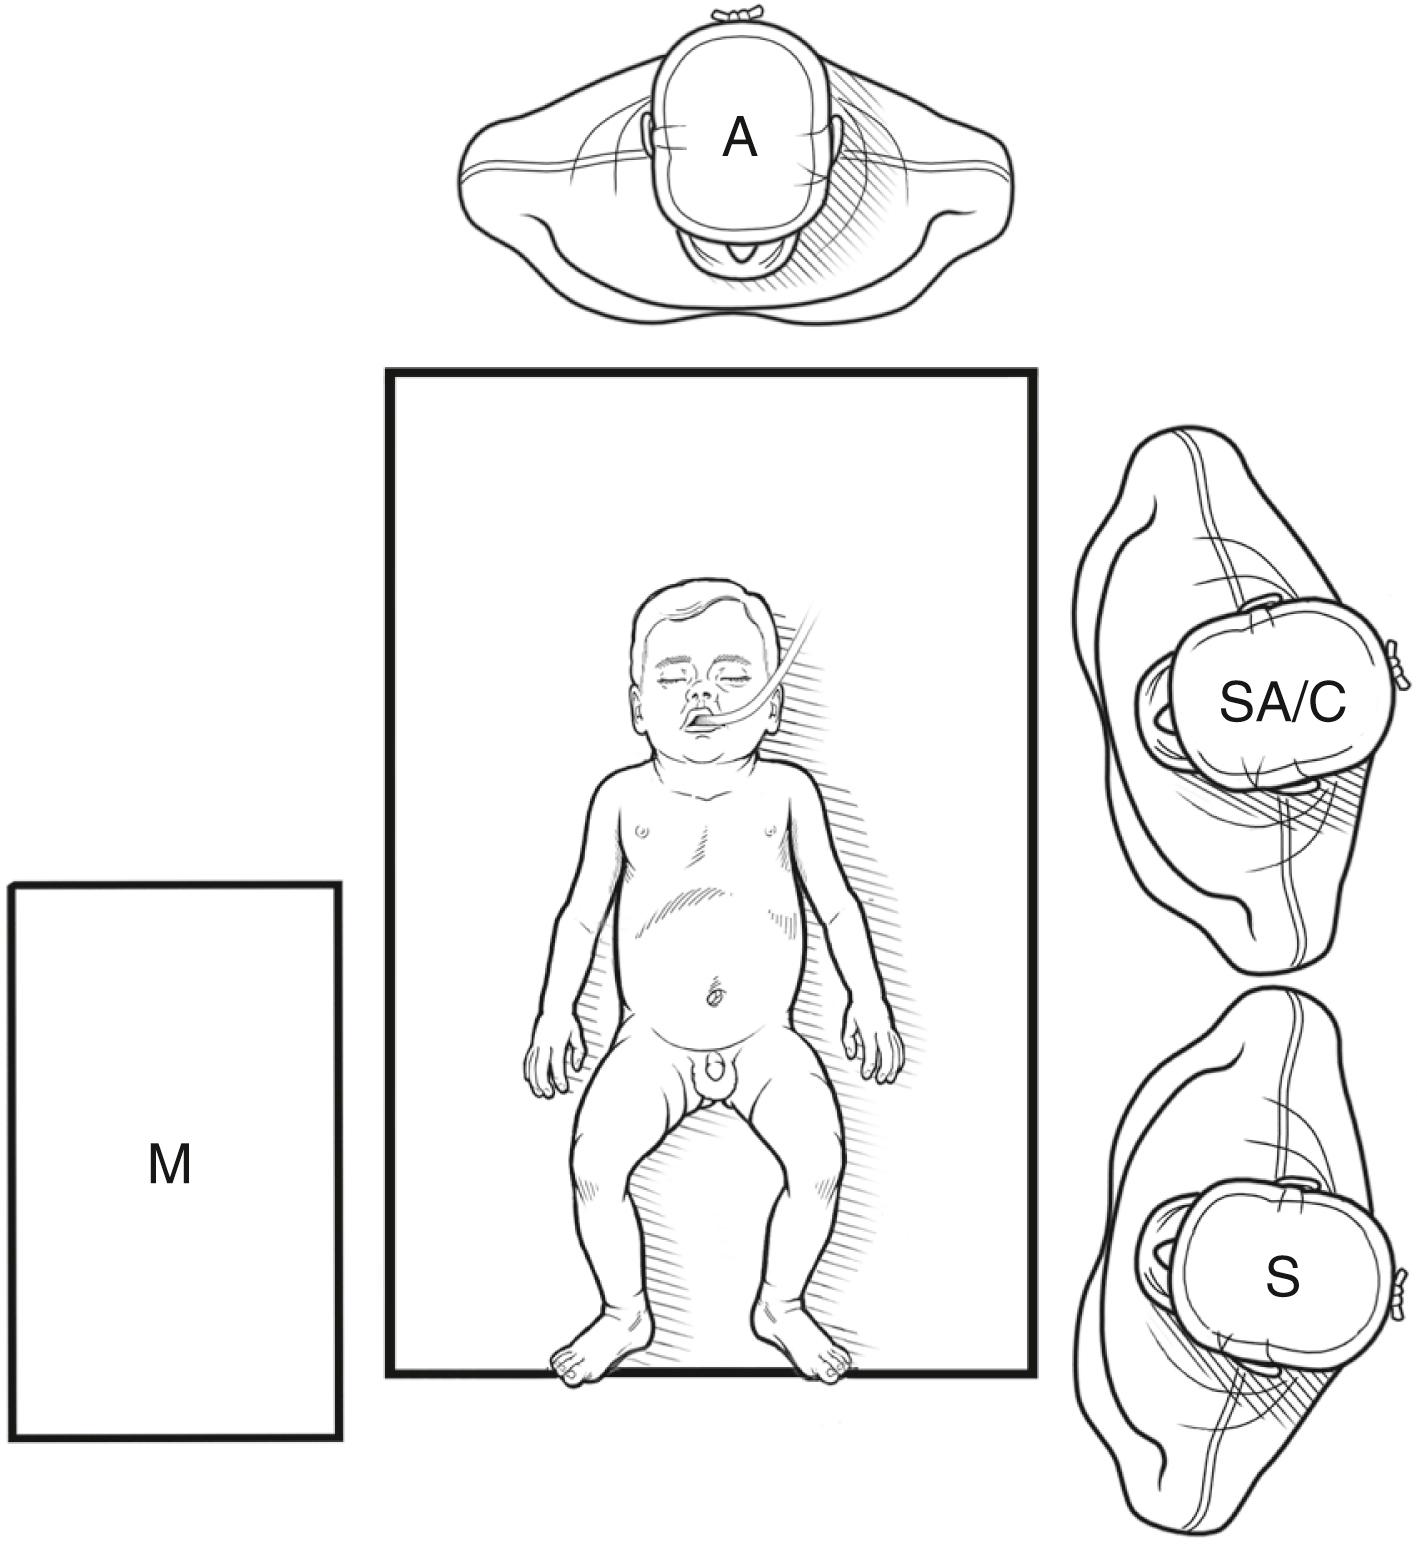 Figure 9-1, For laparoscopic reduction of an ileocolic intussusception, the patient is positioned supine. The patient is secured to the operating table so that the table can be moved into several positions during the operation, thus aiding the surgeon’s exploration of the abdomen. The surgeon (S) and a surgical assistant/camera holder (SA/C) stand on the patient’s left side. The assistant can be situated on either side of the surgeon depending on the location of the intussusception. The monitor (M) is positioned across from the surgeon on the patient’s right side, so that the area of dissection is in line between the telescope attached to the camera and the monitor. The scrub nurse can be positioned at the discretion of the surgeon but usually is situated at the foot of the bed. A, anesthesiologist.